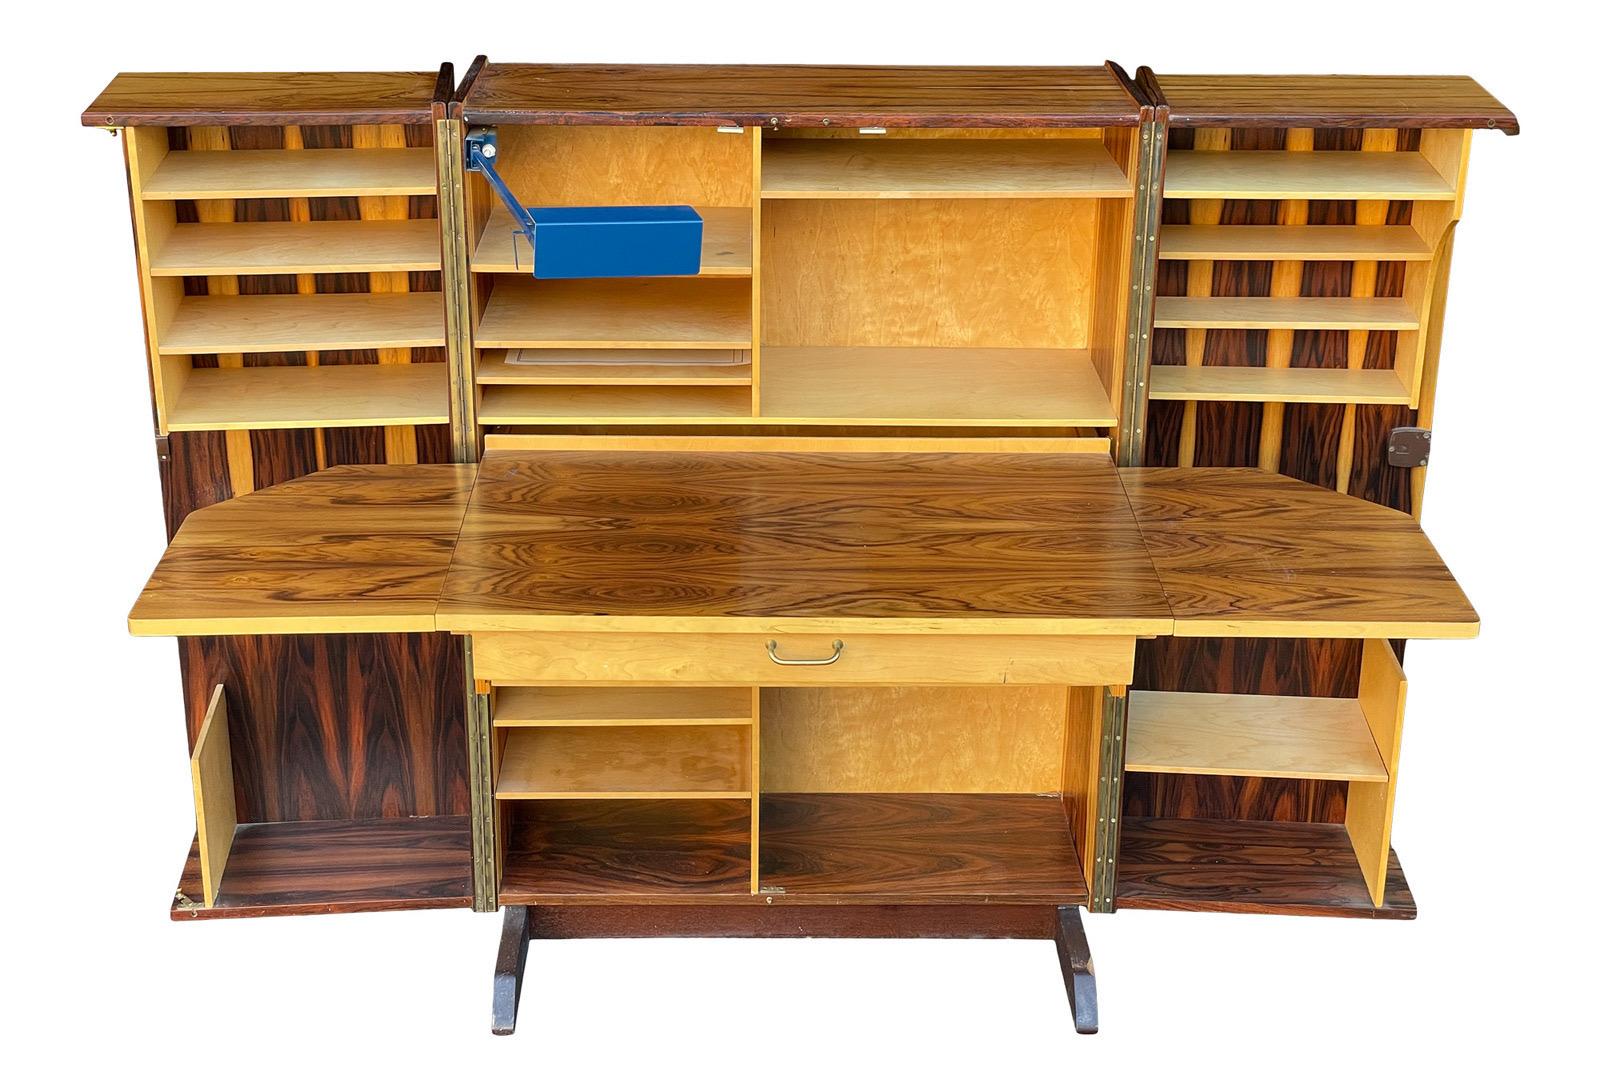 A vintage Norwegian hideaway desk, produced circa 1960s, in the Scandinavian Modern style; this versatile desk can compact into box, veneered in rosewood and expand into a full office with extensive shelving space, desk and foldable leaves, Overall